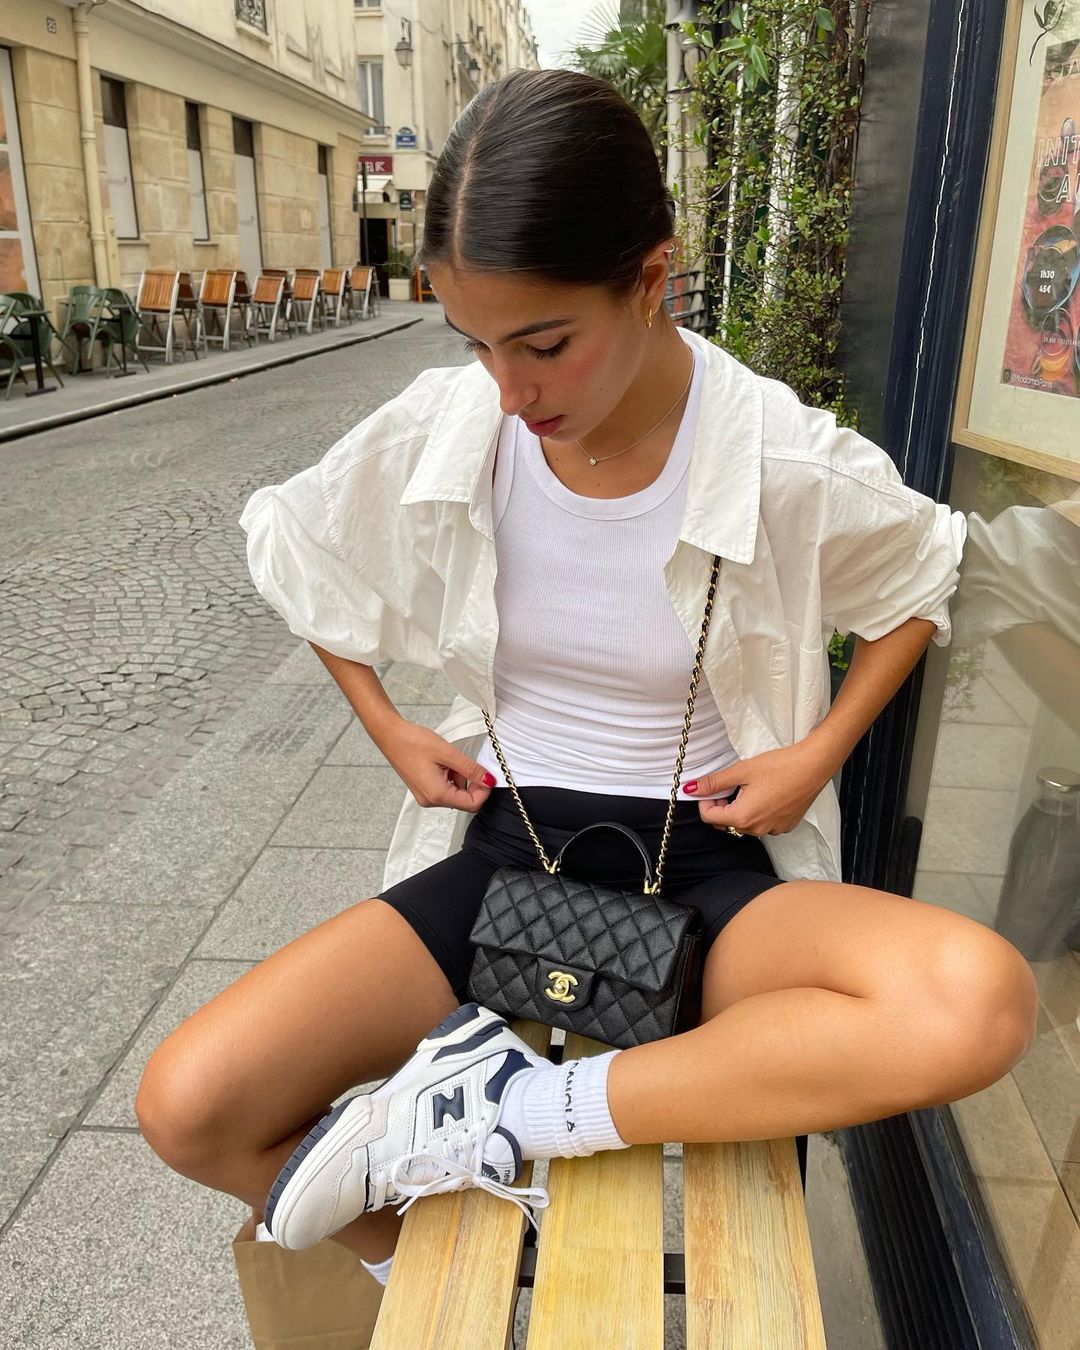 90s-Inspired Summer Outfits: @tamaramory wears a pair of cycling shorts